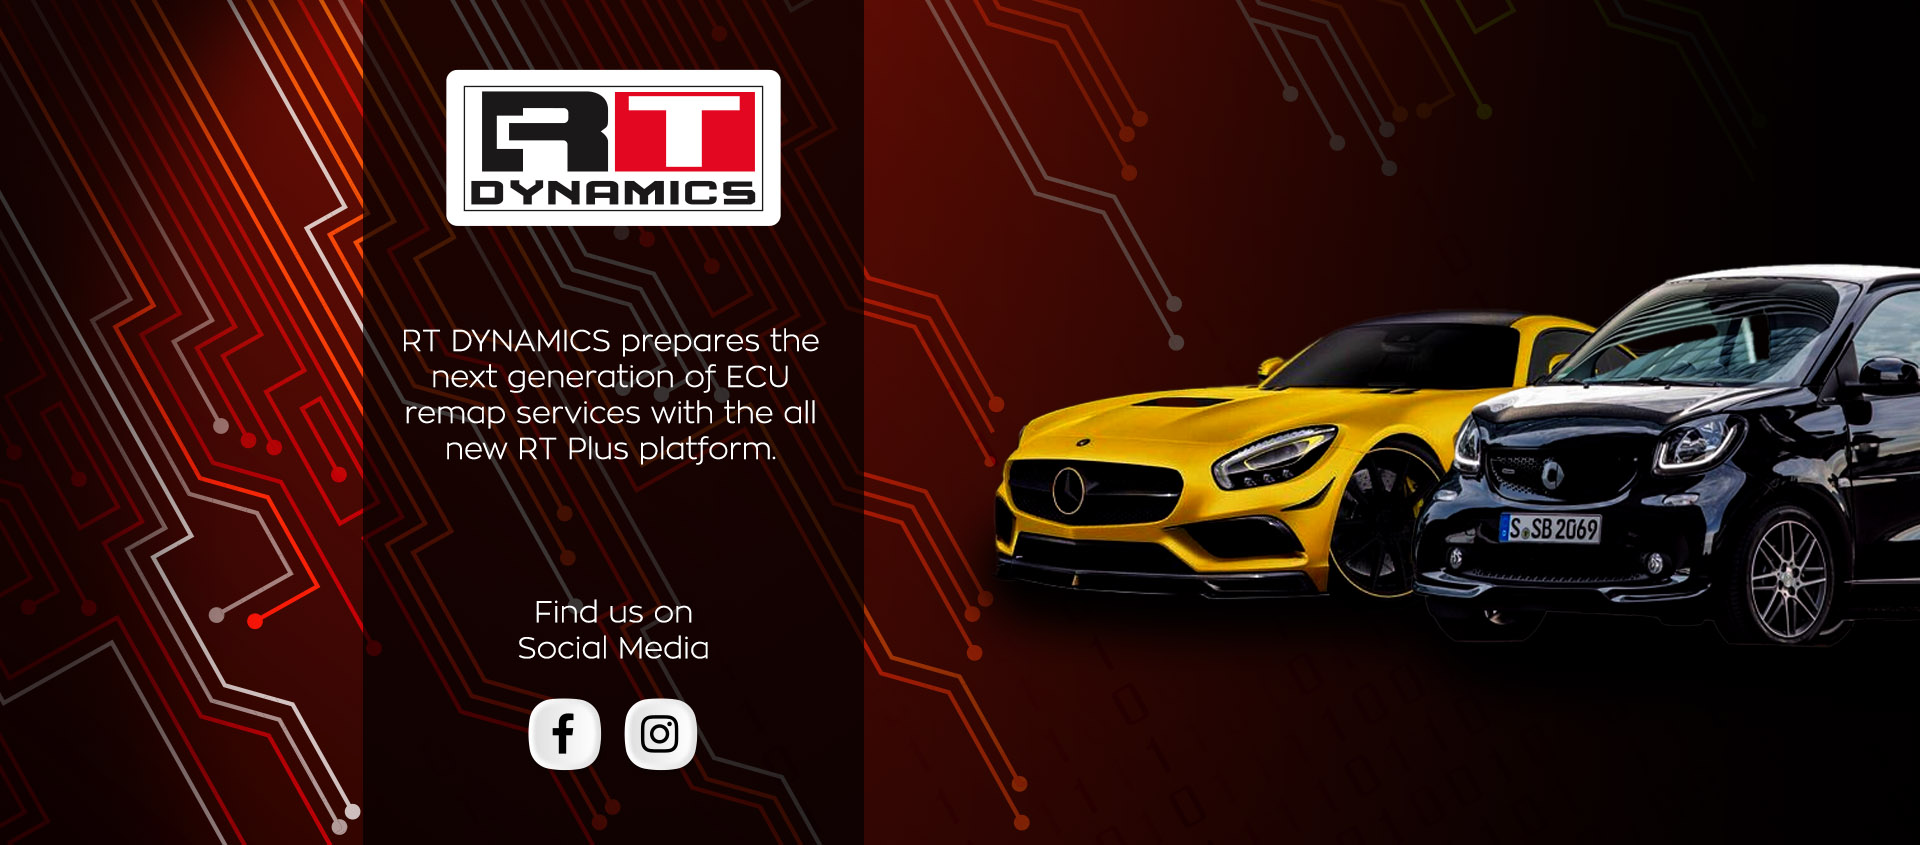 RT DYNAMICS prepares the next generation of ECU remap services with the all new RT Plus platform.